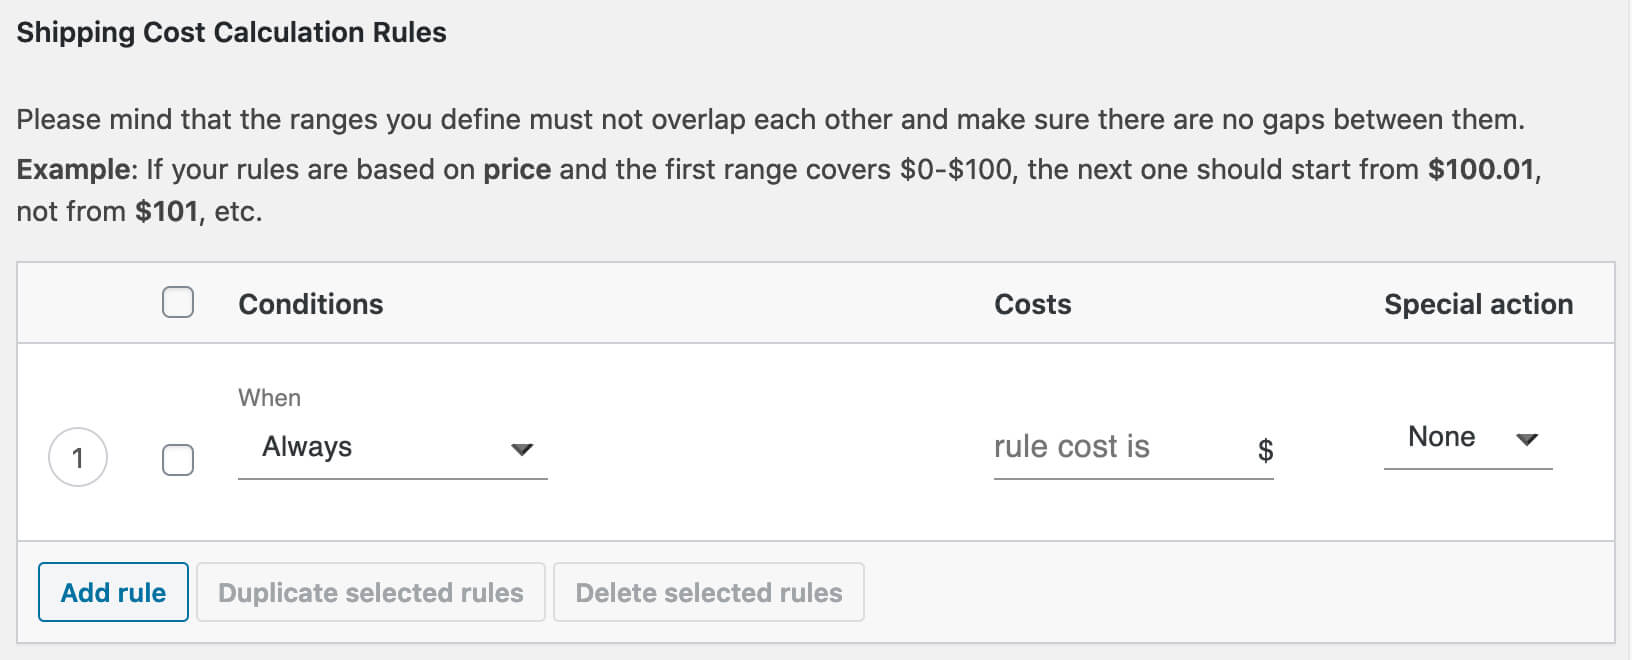 Flexible Shipping Cost Calculation Rules section